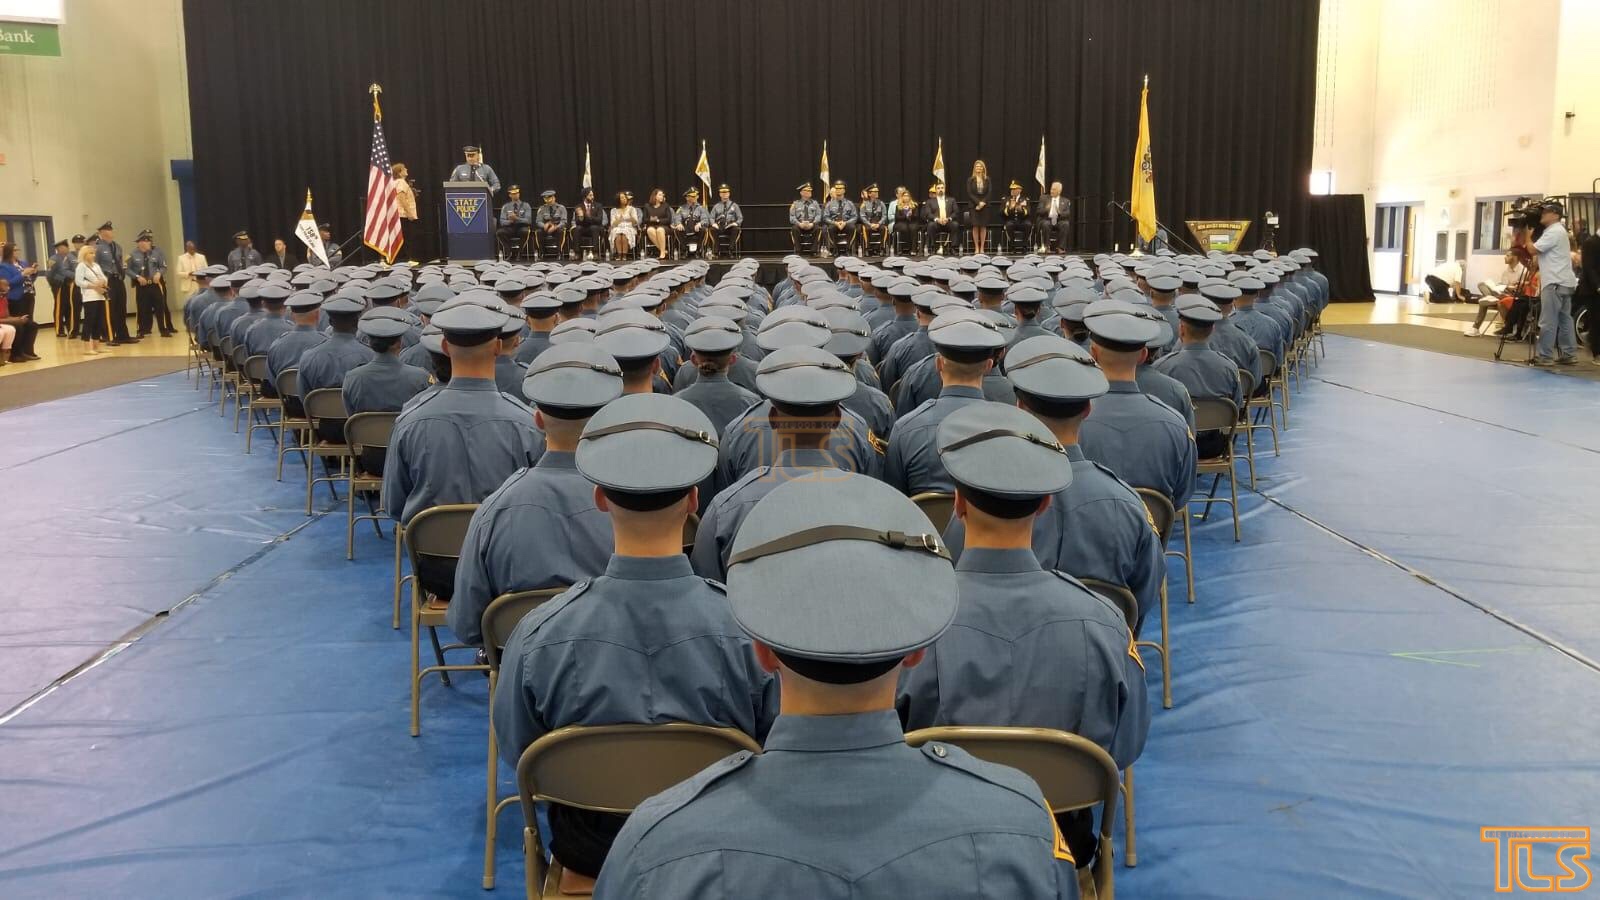 PHOTOS More from the NJSP graduation The Lakewood Scoop